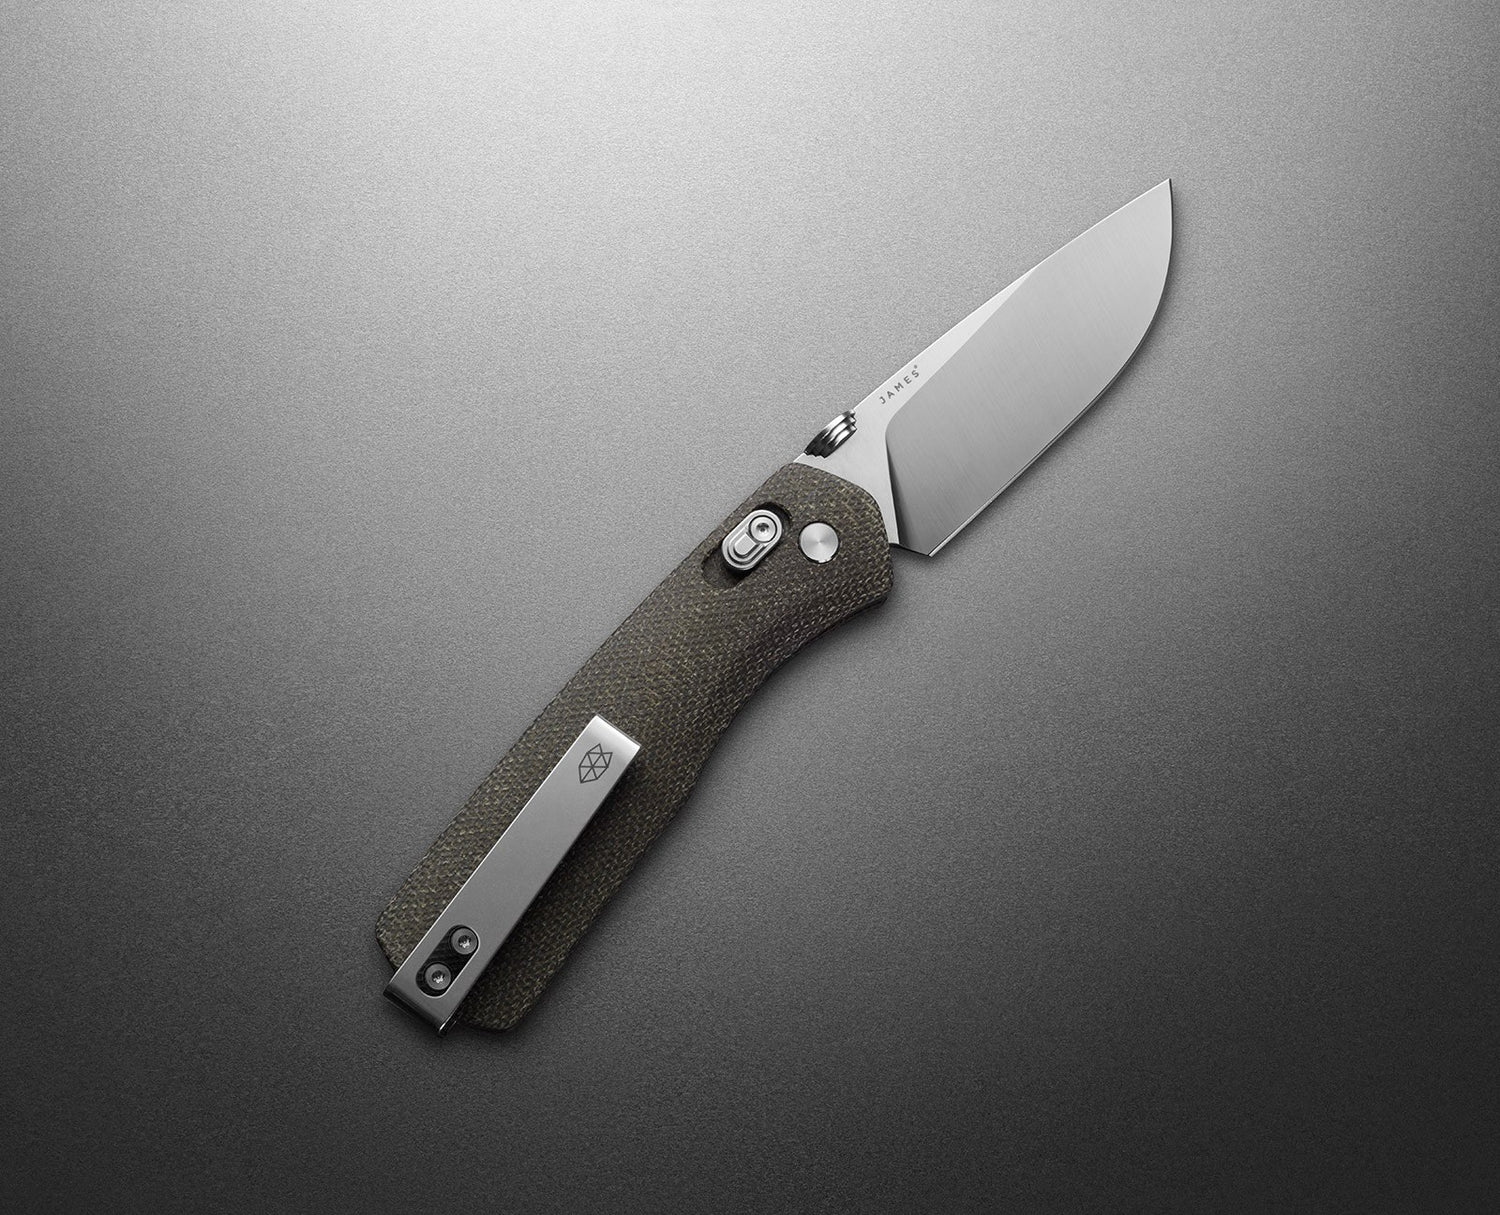 The Carter In OD Green Micarta + Stainless